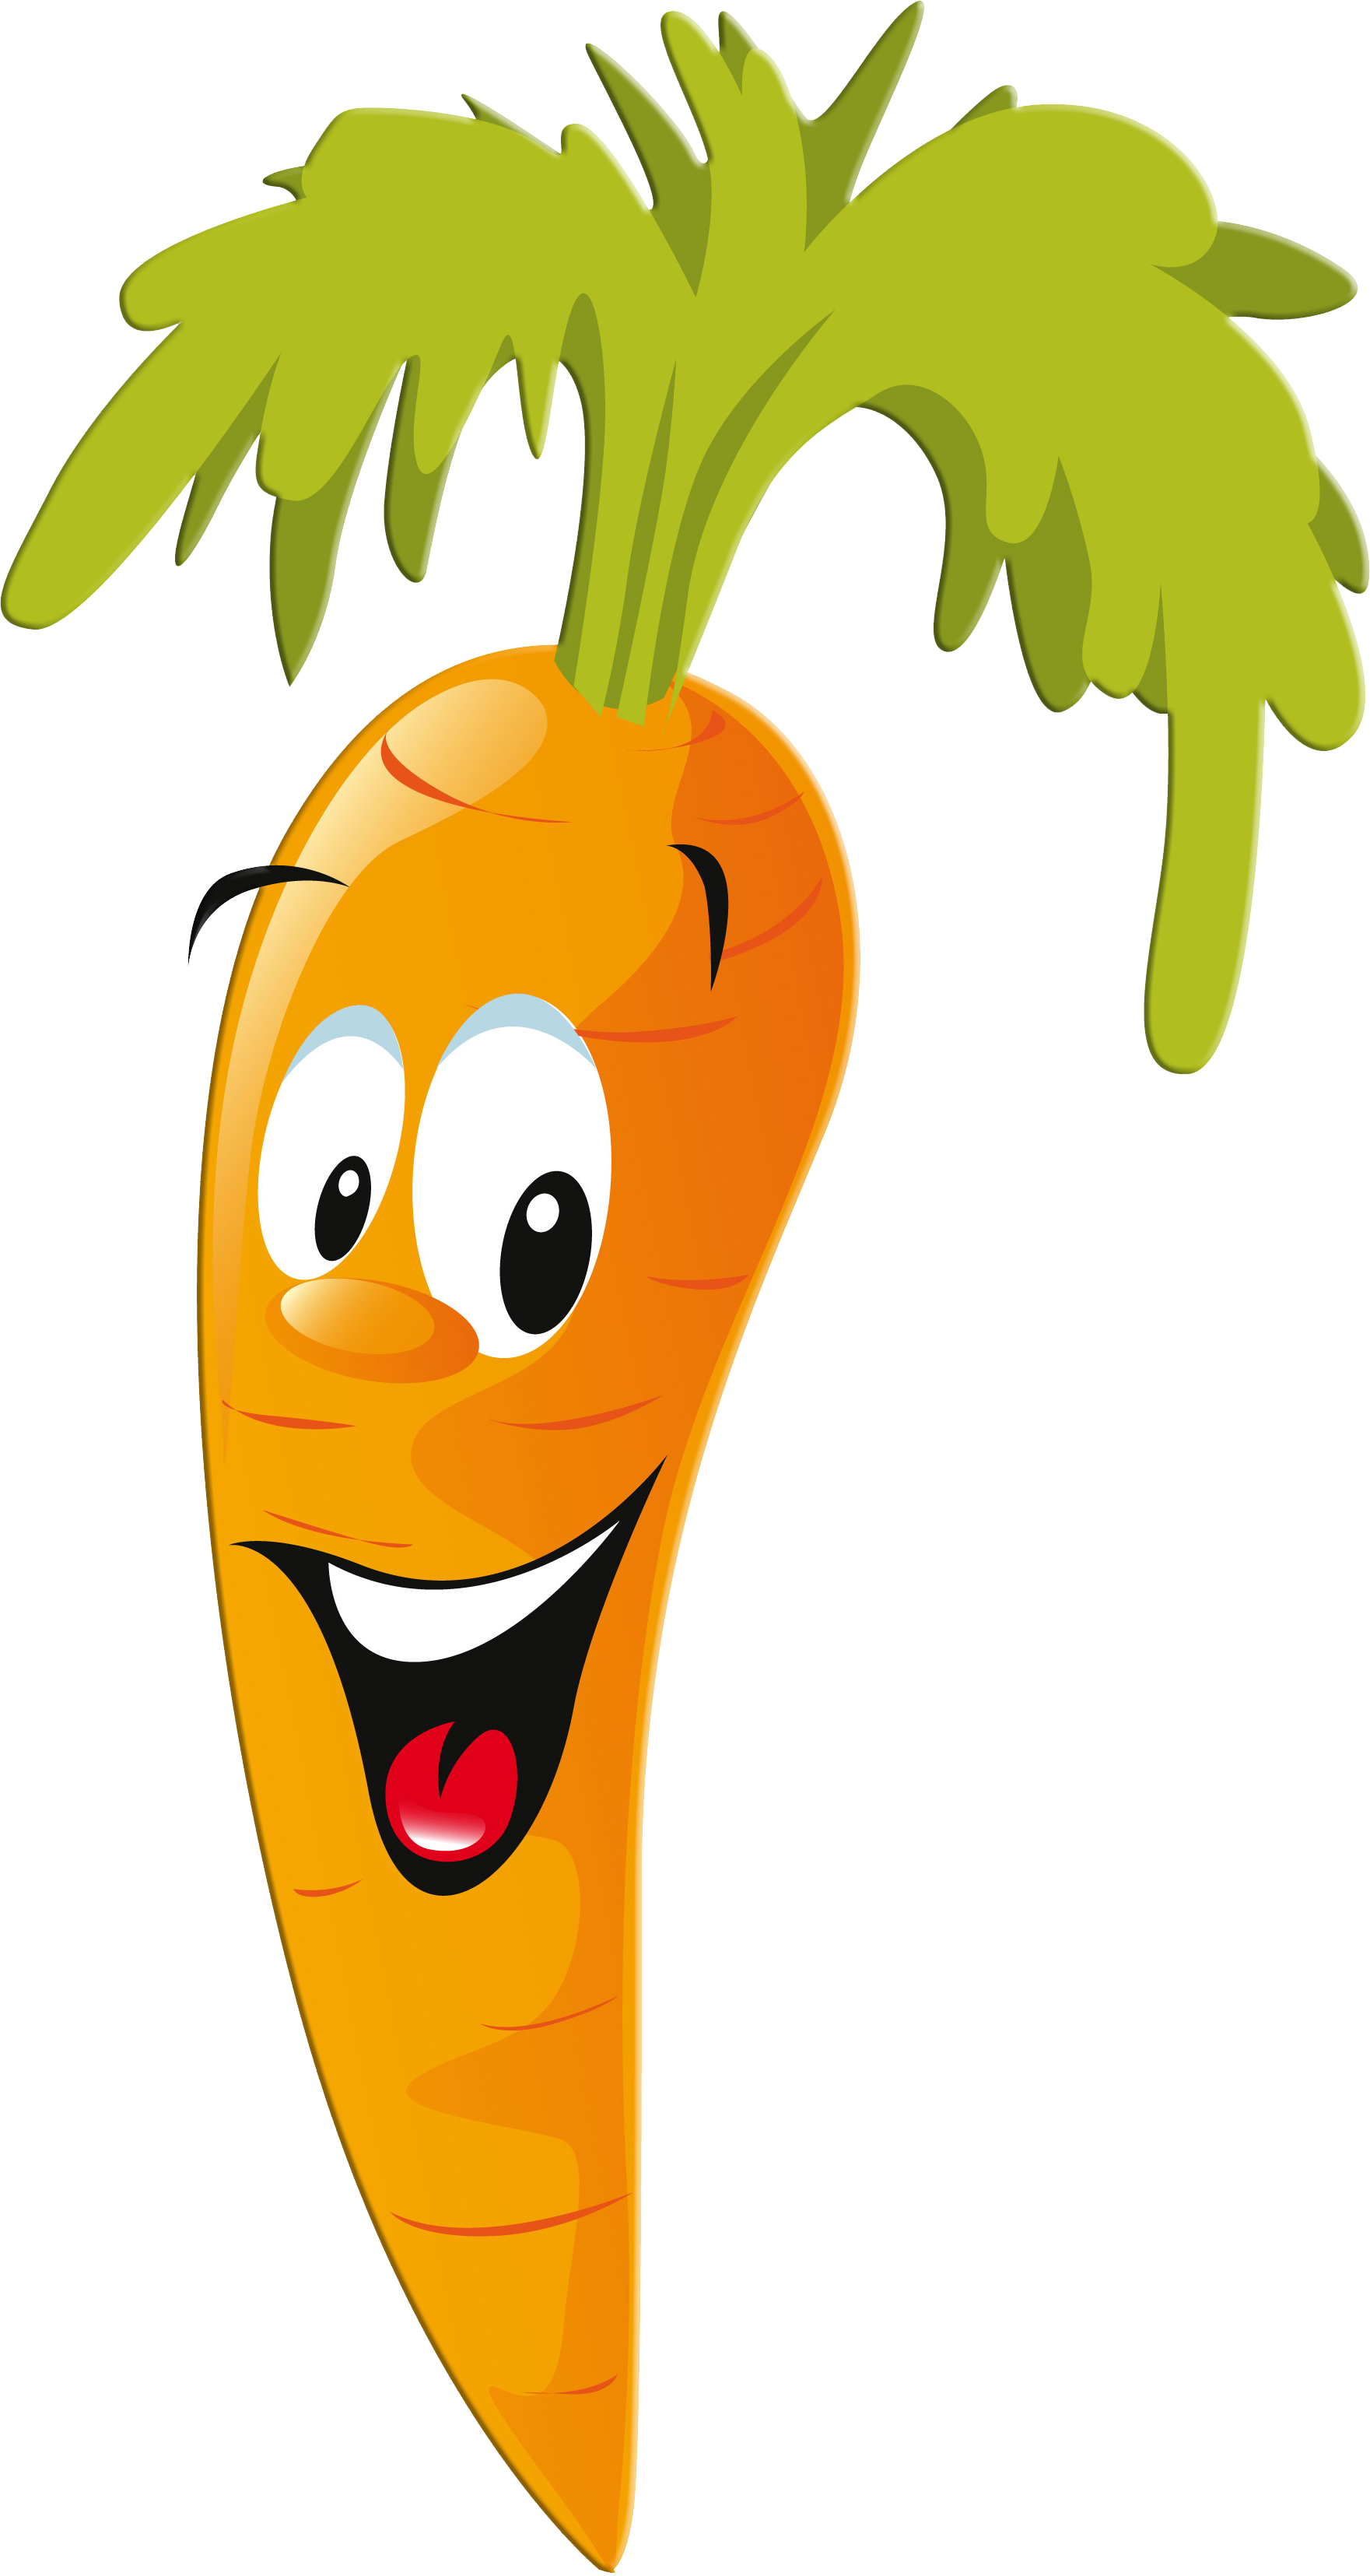 Pin by on art. Face clipart vegetable